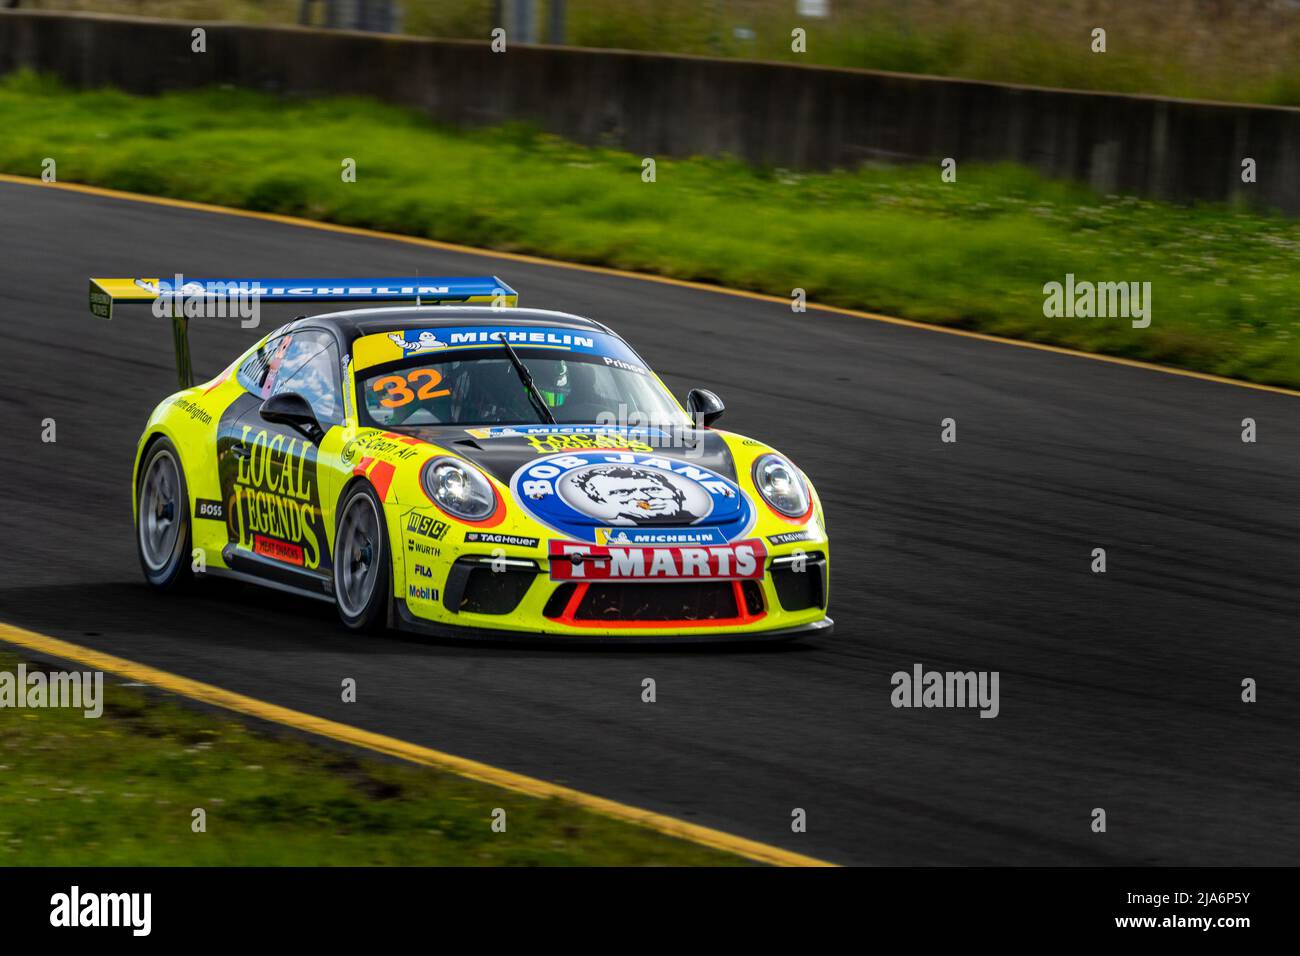 Sydney, Australia. 27 May, 2022. Courtney Prince piloting her Porsche Carrera Cup car down towards turn 2 at Sydney Motorsport Park during race 2 of the Porsche Michelin Sprint Challenge. Credit: James Forrester / Alamy Live News. Stock Photo